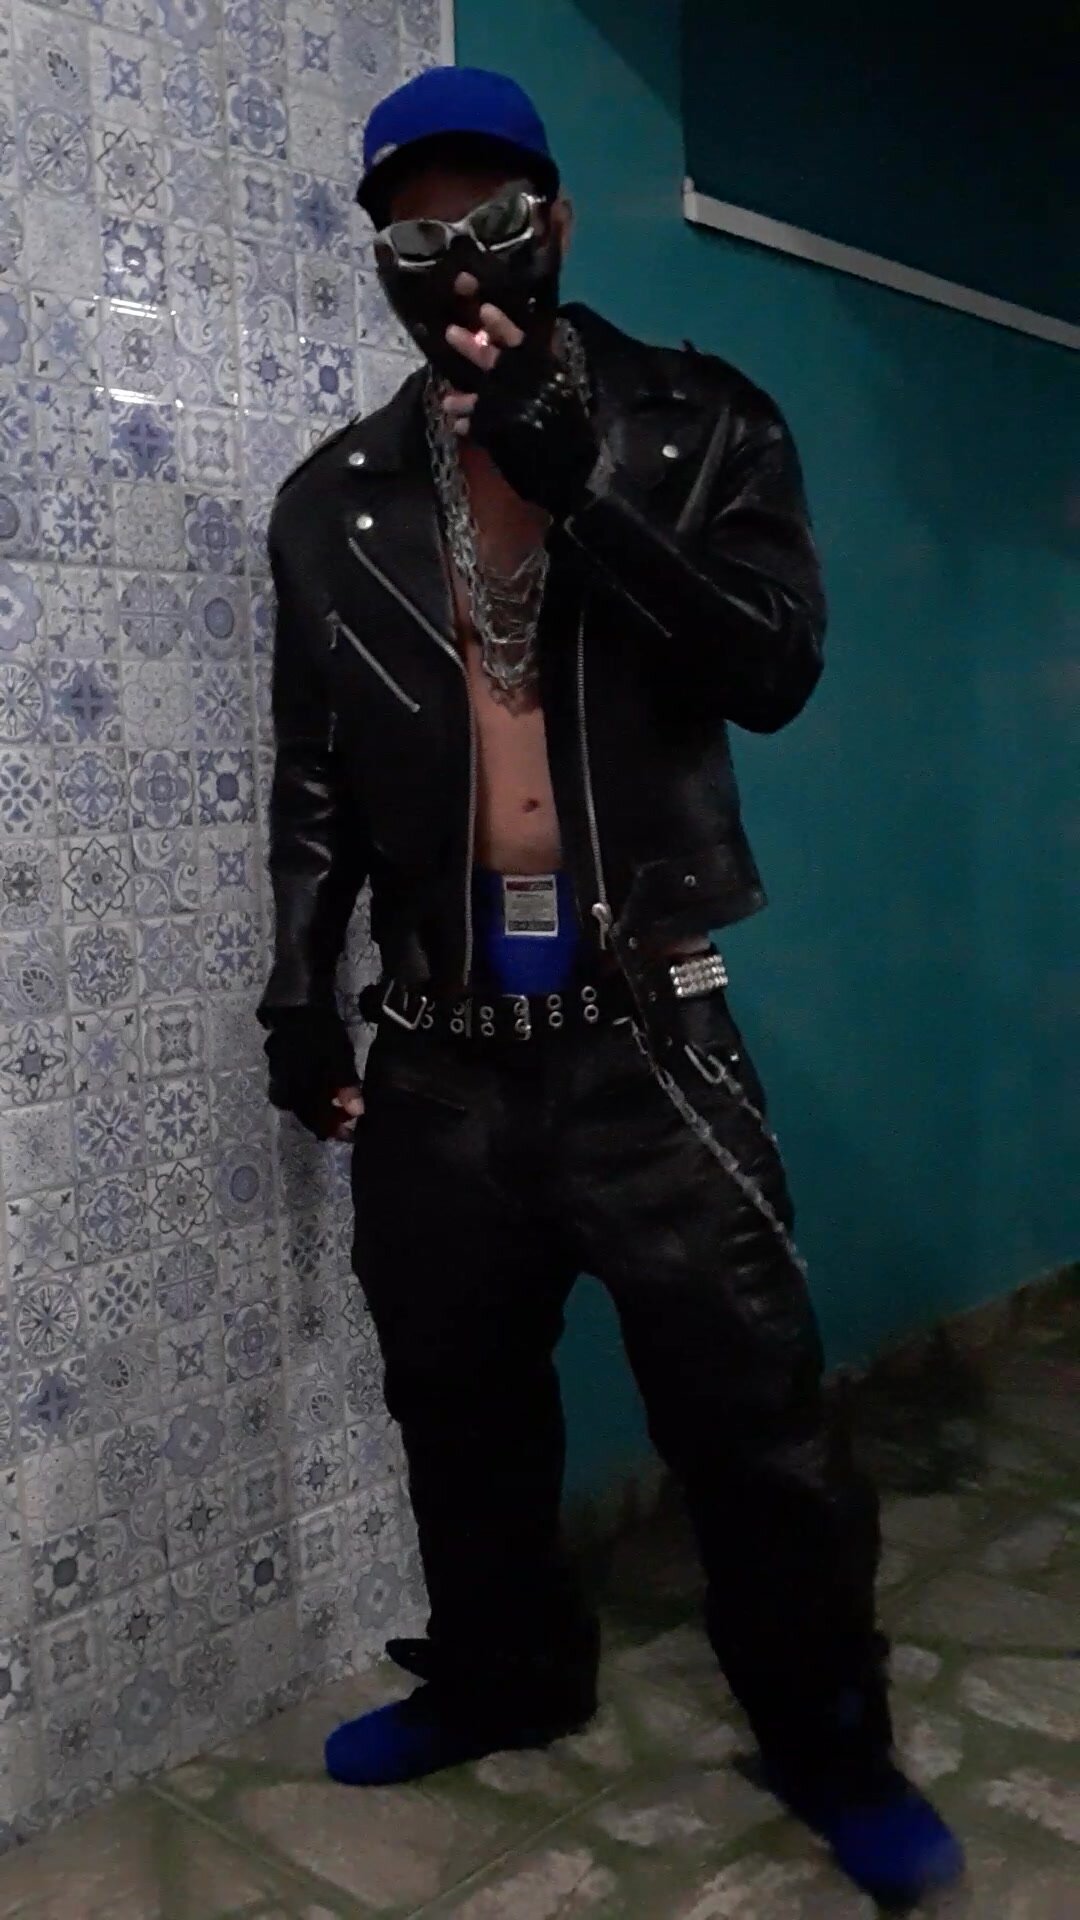 Scally boy baggy leather  drunk and smoking